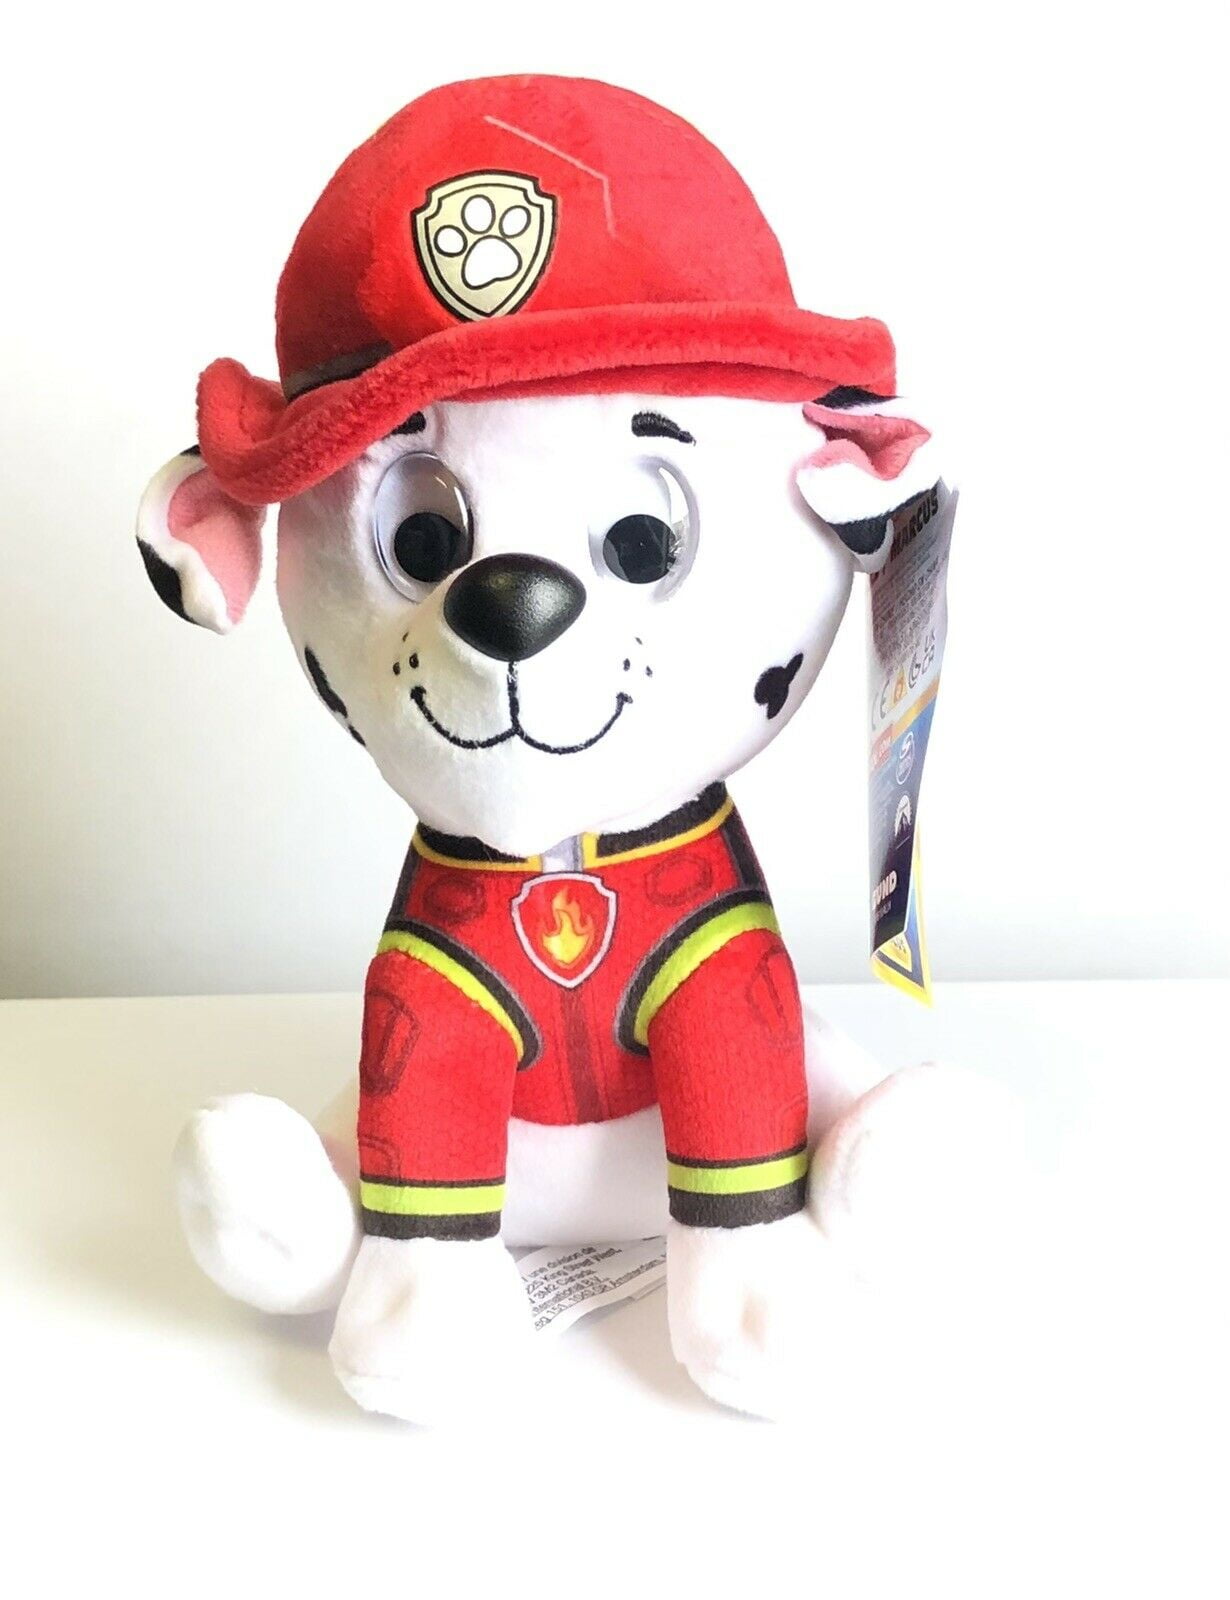 Paw Patrol Snuggle Up peluche avec TORCHE & souds Marshall 